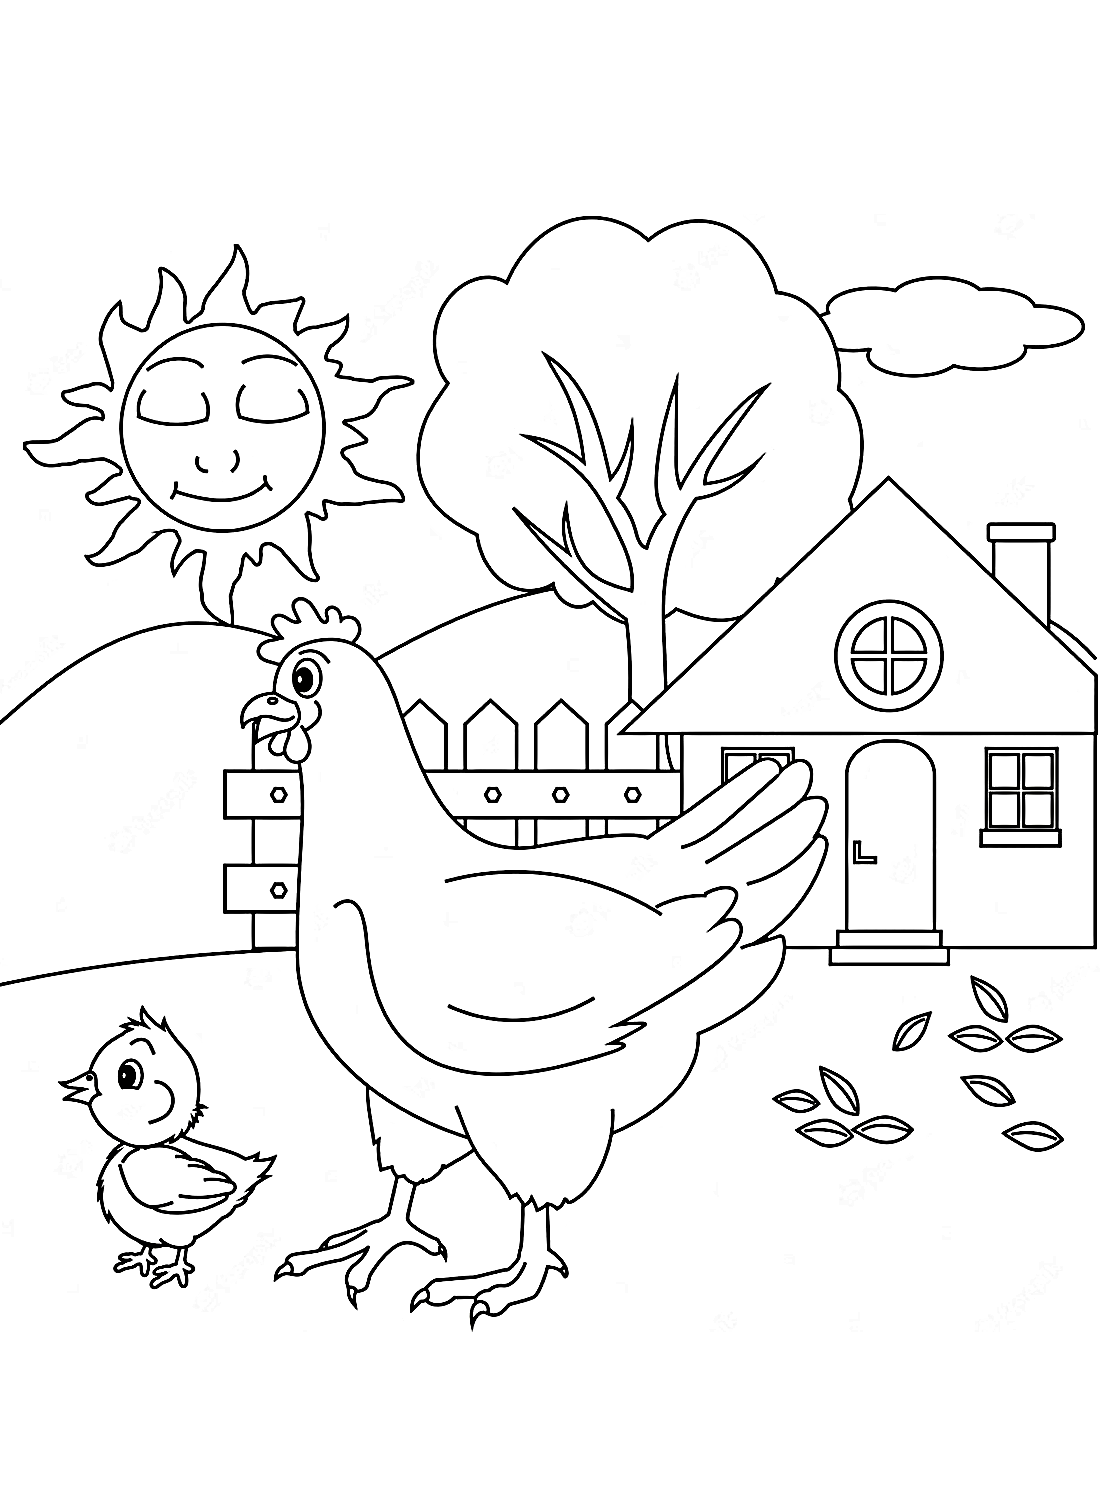 A hen and a house Coloring Pages